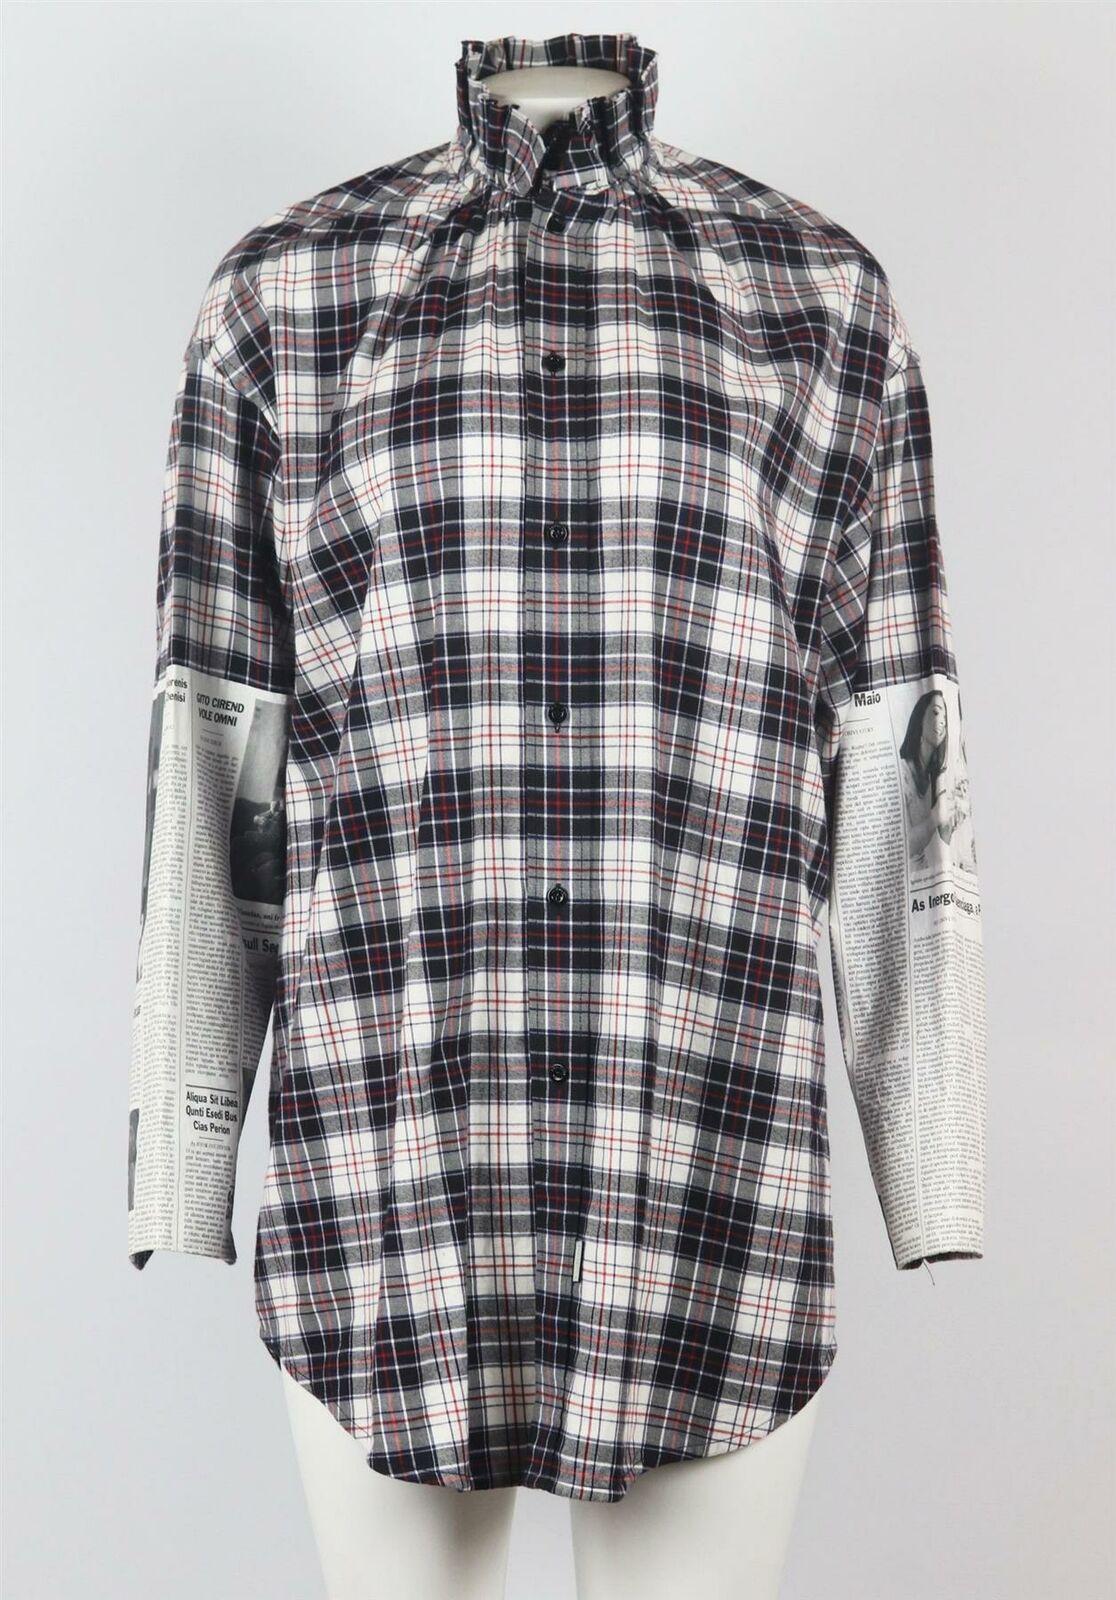 Demna Gvasalia continues to play with size and proportions for Balenciaga's collections which is echoed by this black and white check shirt, crafted in Italy with dropped shoulders for an oversized shape, it has a high ruffled collar and features